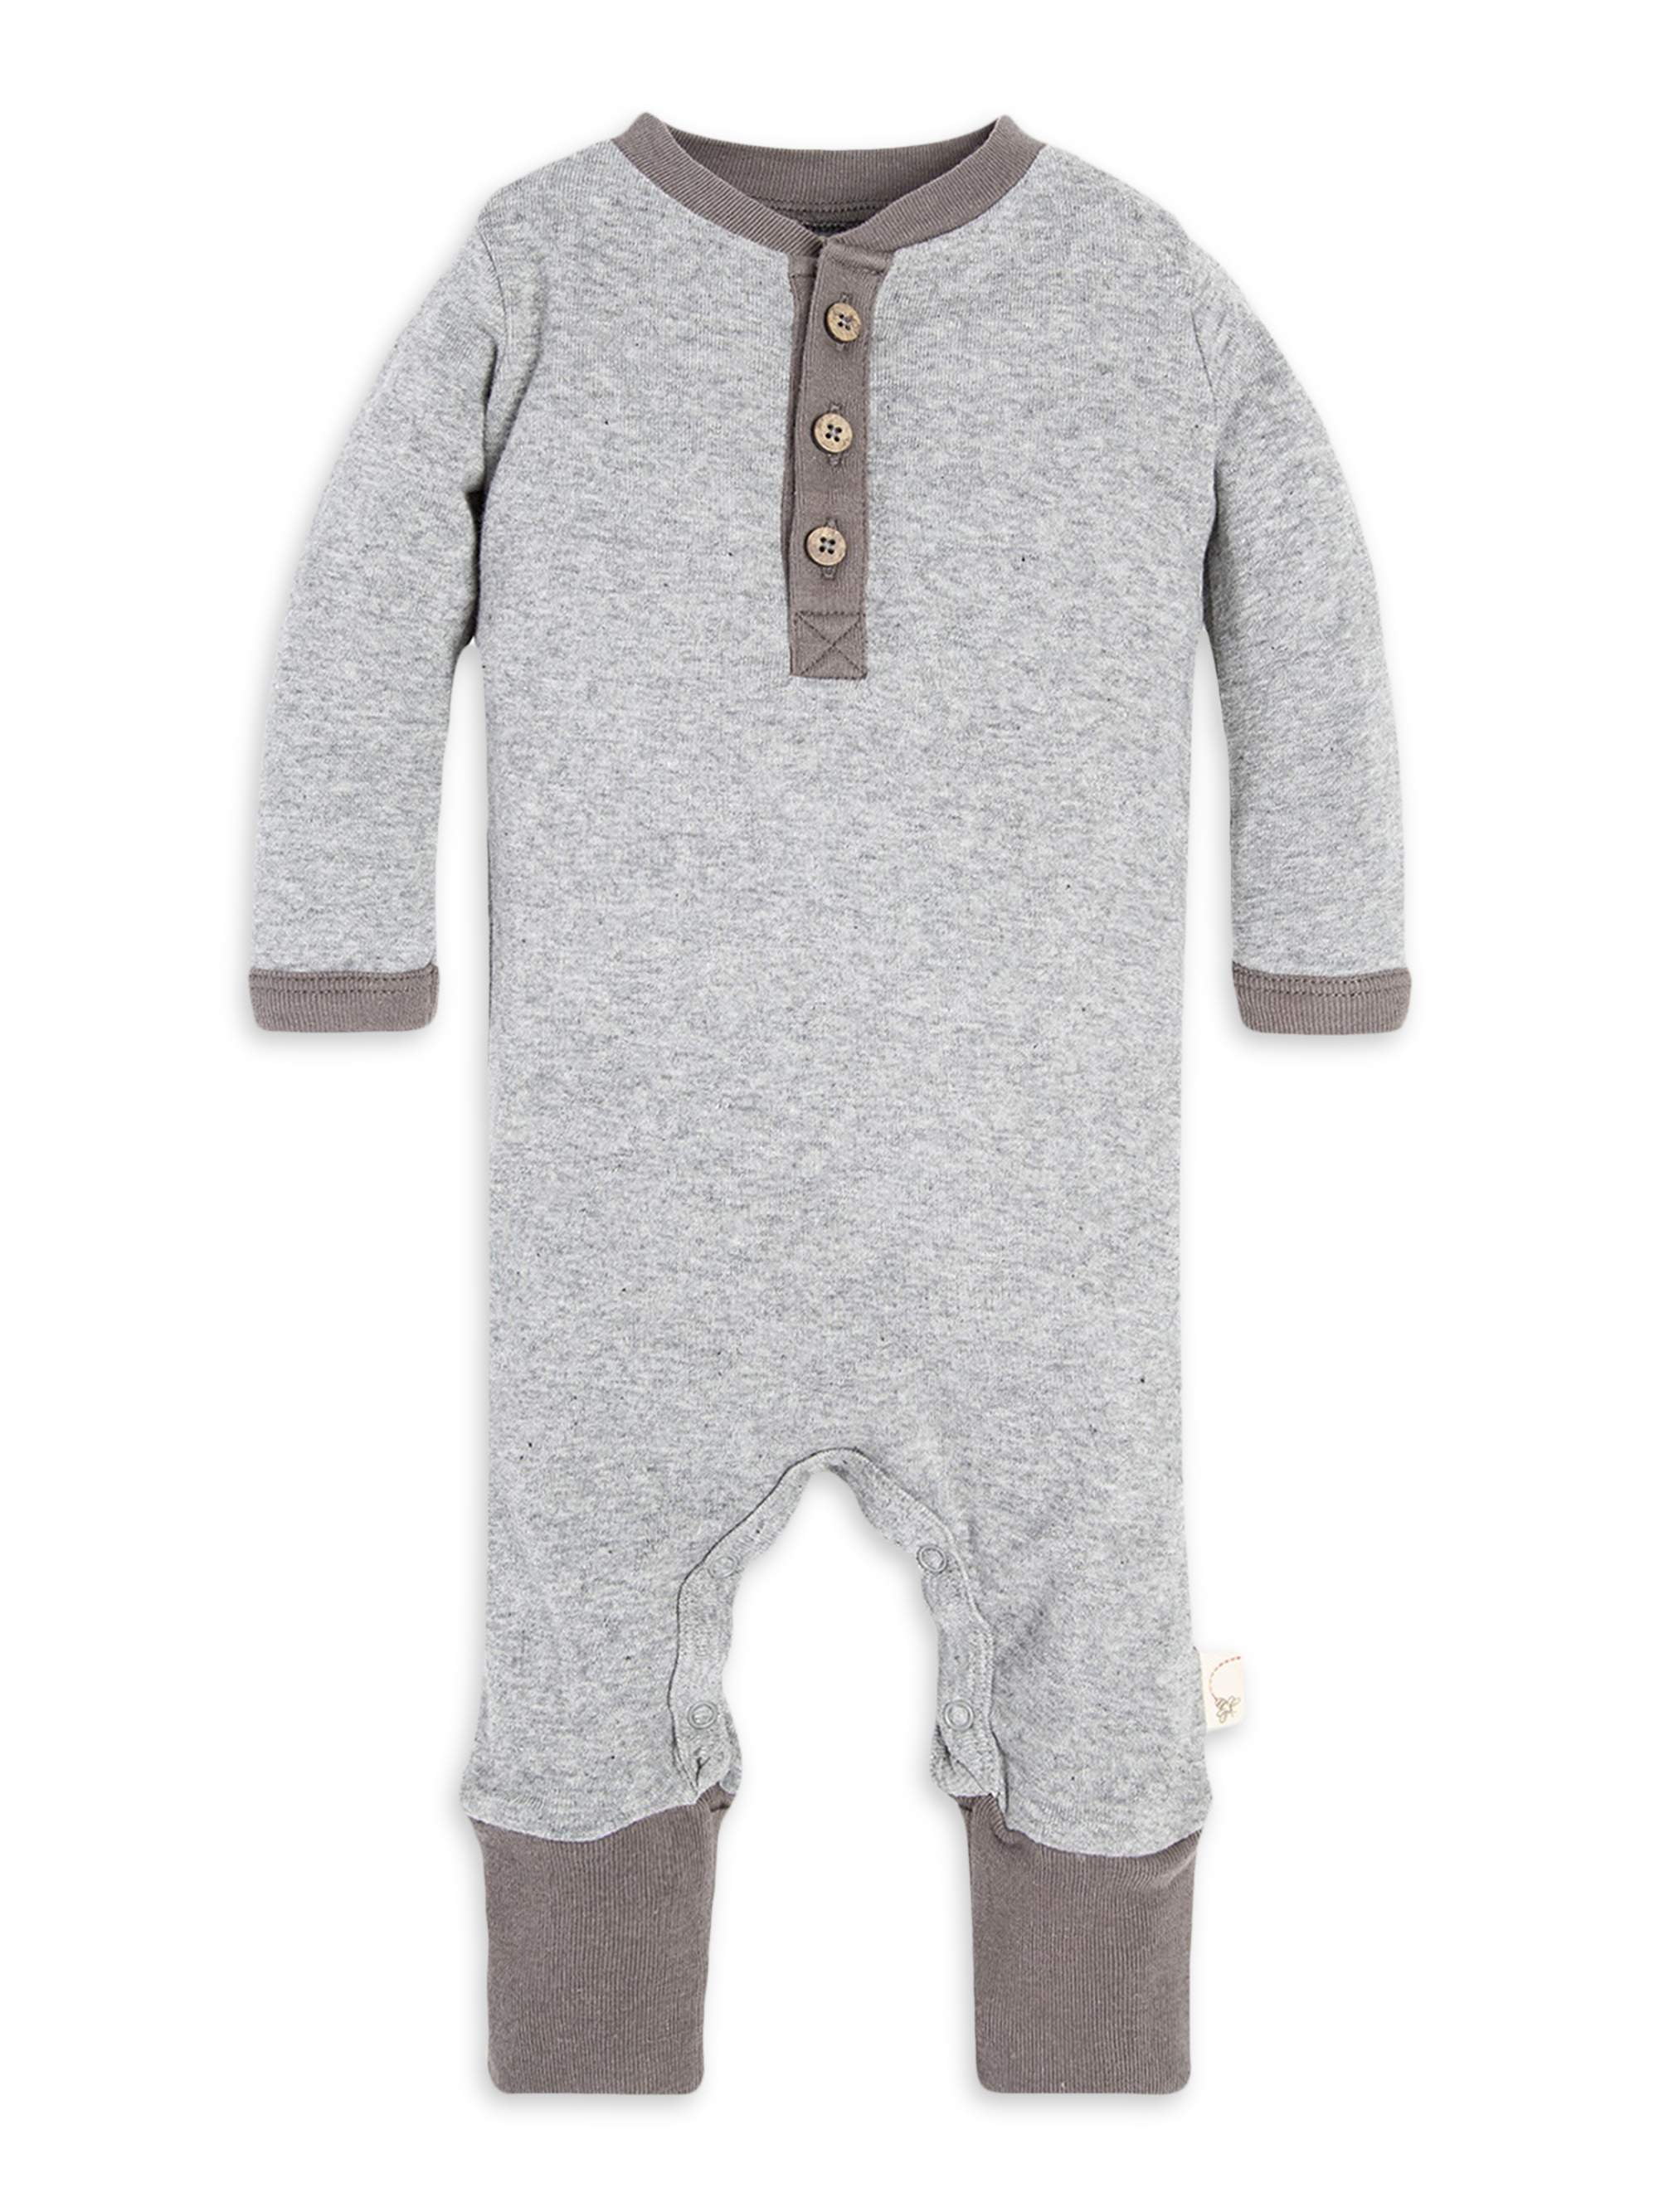 Burts Bees Baby Boy Organic Coverall Hat Set Size 9 12 18 24 Months Gray Striped 